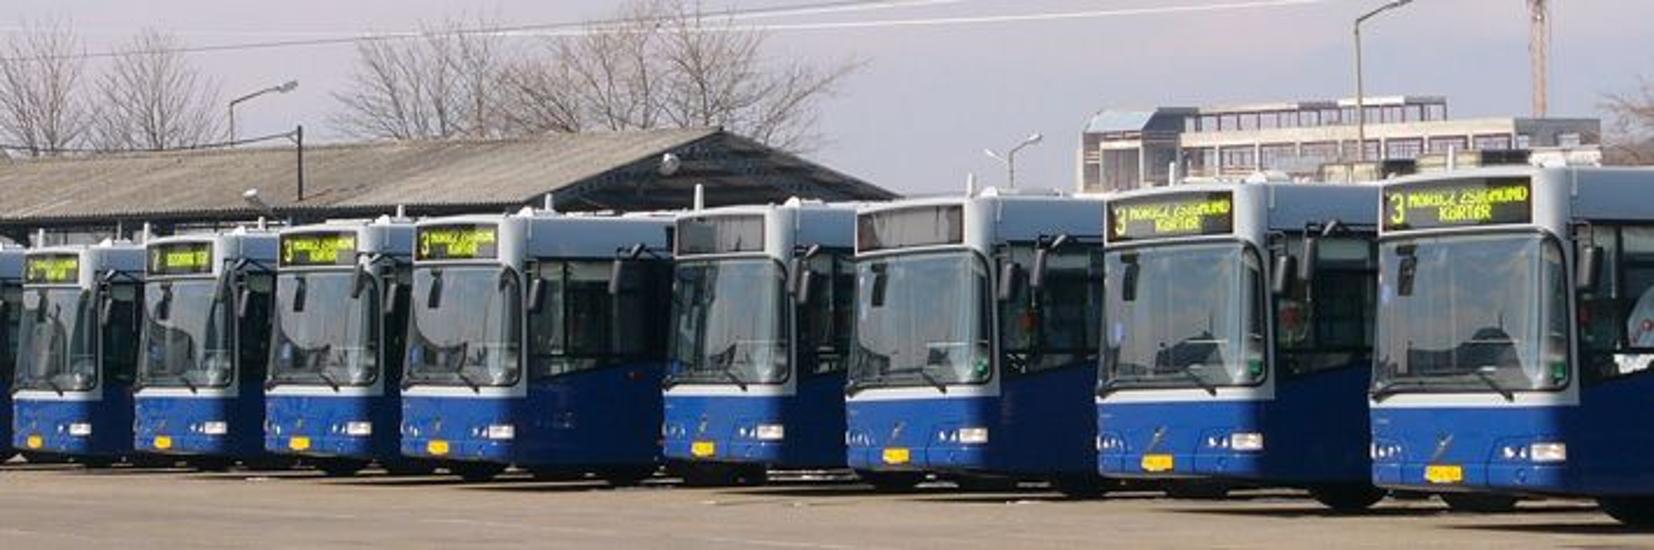 Budapest Transport Company Workers Call Multi-Day Strike